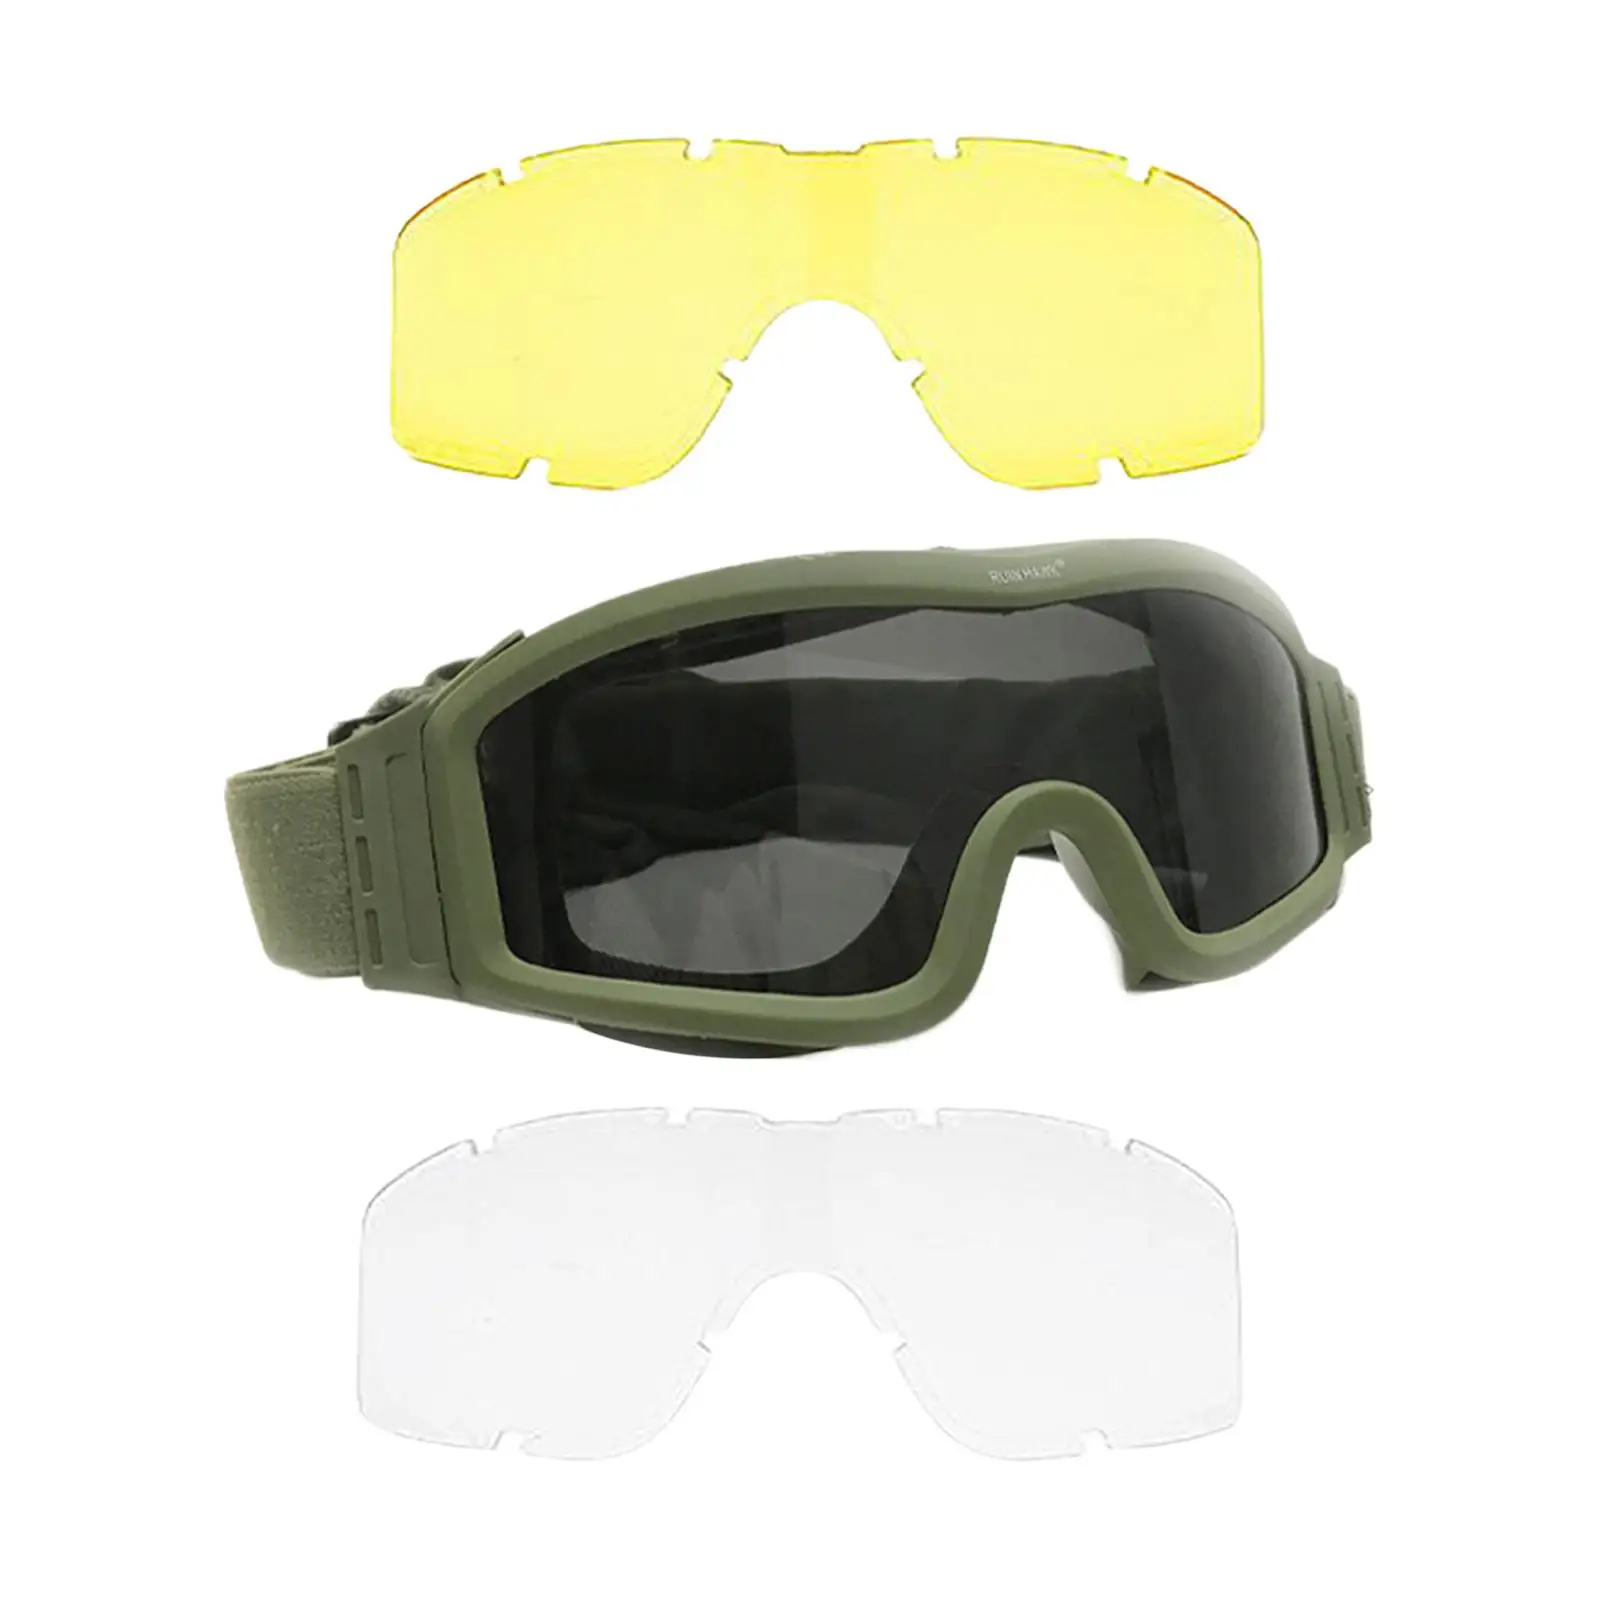 Black Transparent Yellow Goggles Glasses  Scratch Resistant Adjustable Windproof for Mountaineering Riding Shooting Cycling 